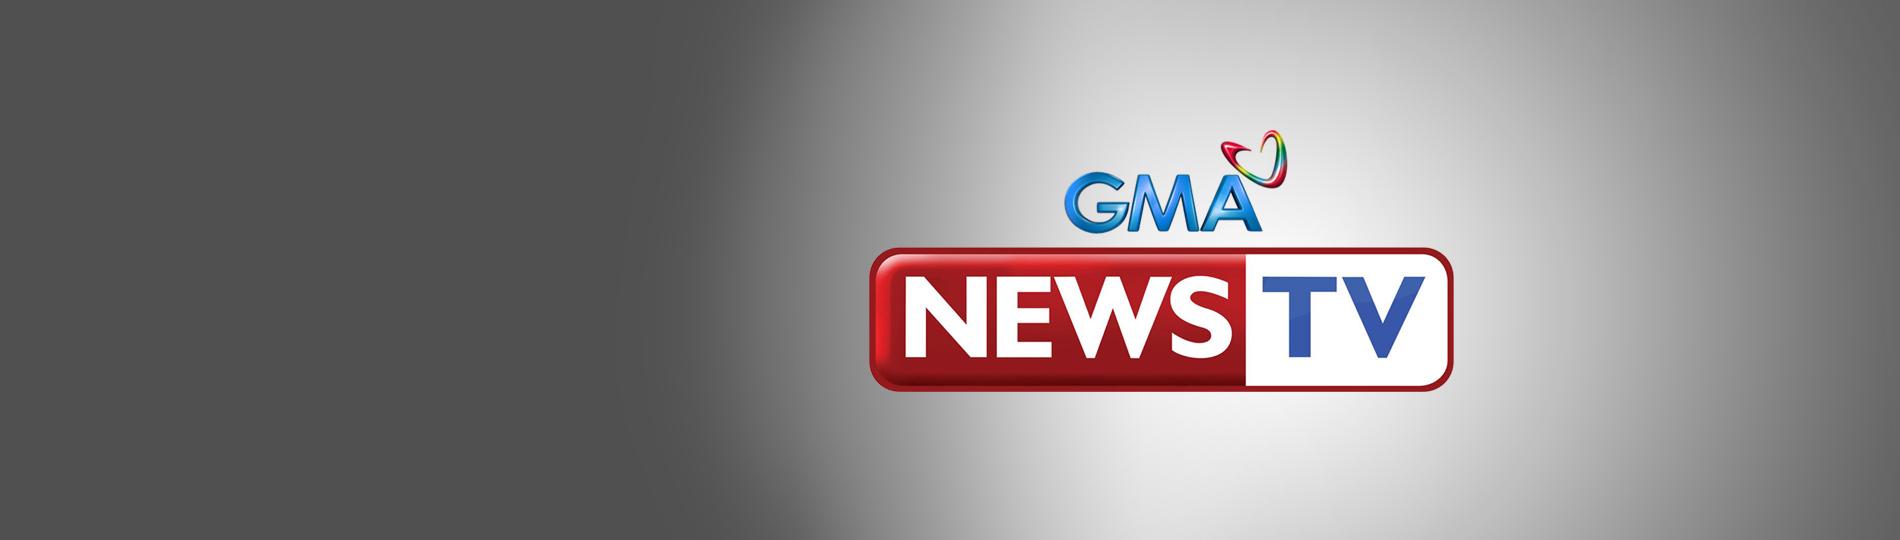 GMA News TV GMA Entertainment Online Home of Kapuso Shows and Stars